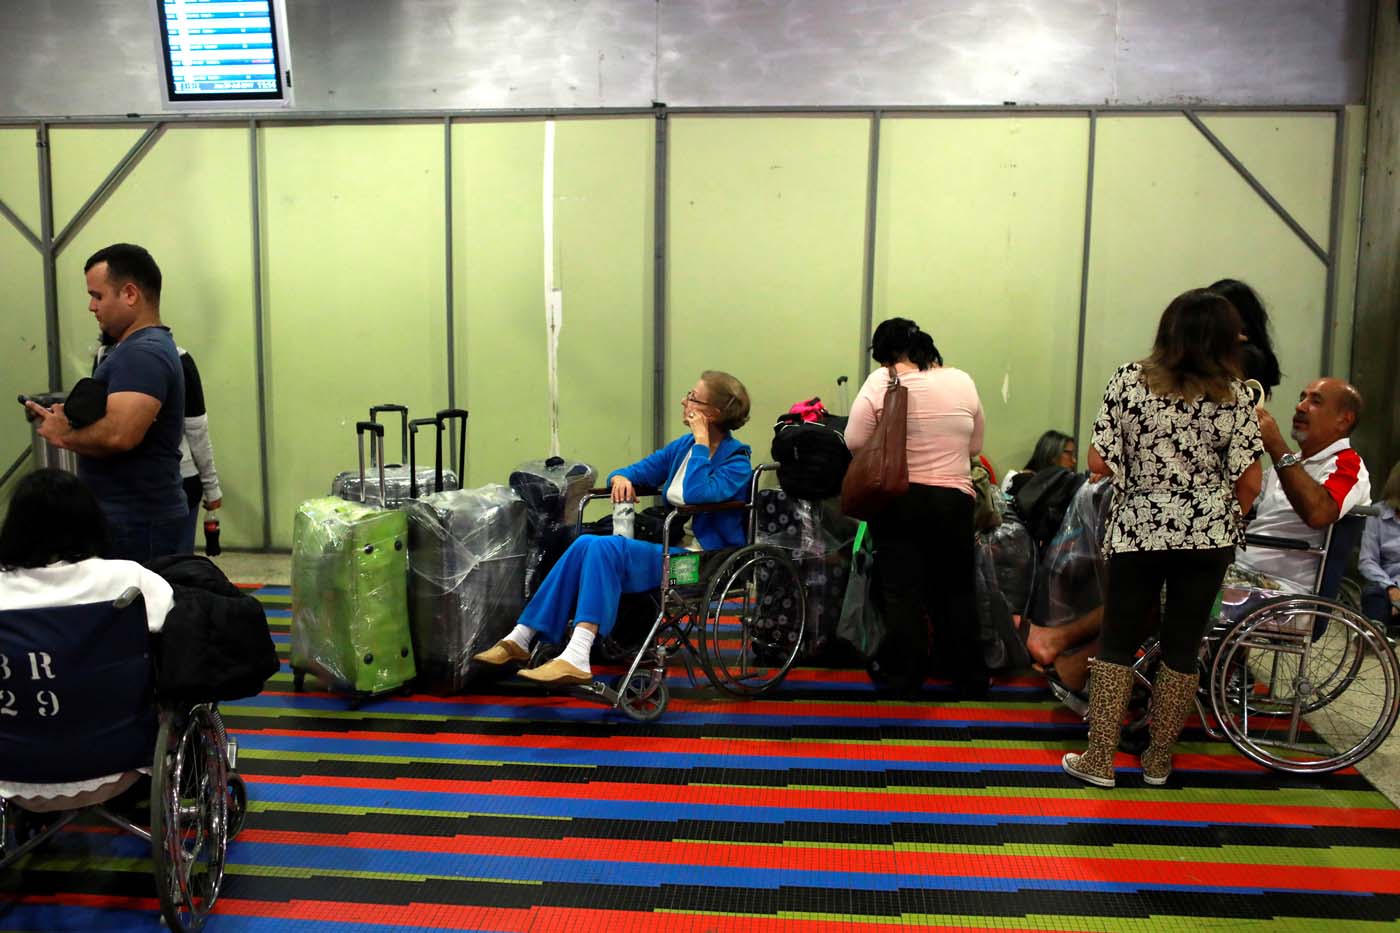 People wait by a counter of Avianca airline, at the Simon Bolivar airport in Caracas, Venezuela July 27, 2017. REUTERS/Marco Bello